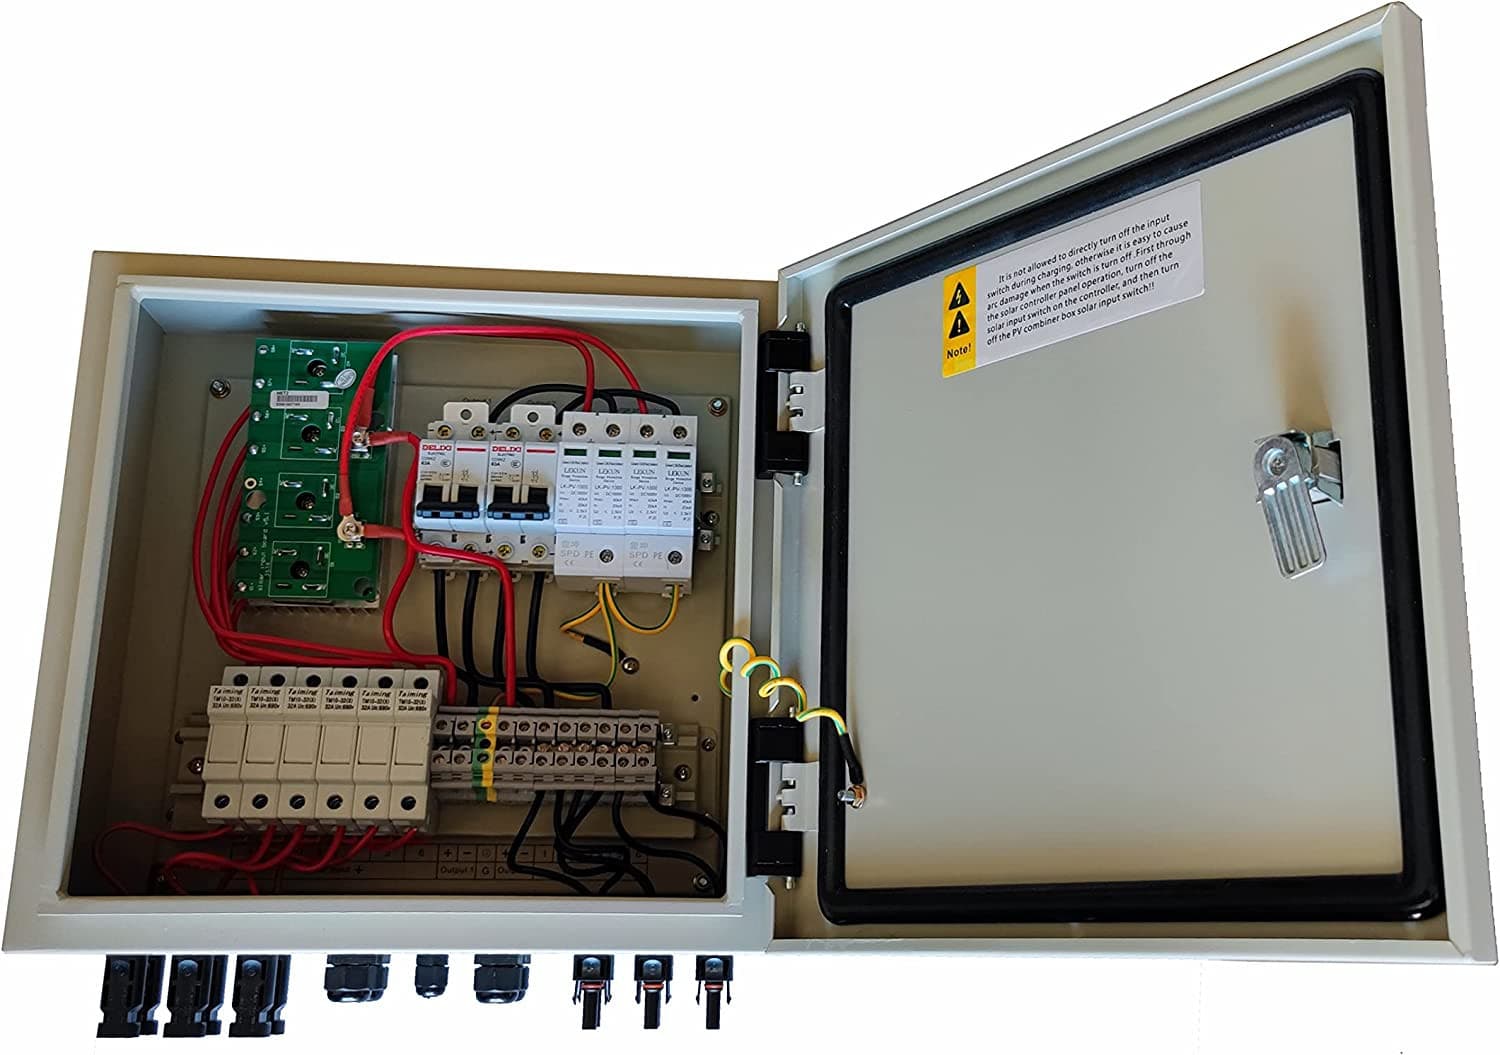 HYSOLIS|Solar PV Combiner Box 4/6 String, 63A Breakers,16A String fuses,Anti Reverse Current Module -EcoPowerit